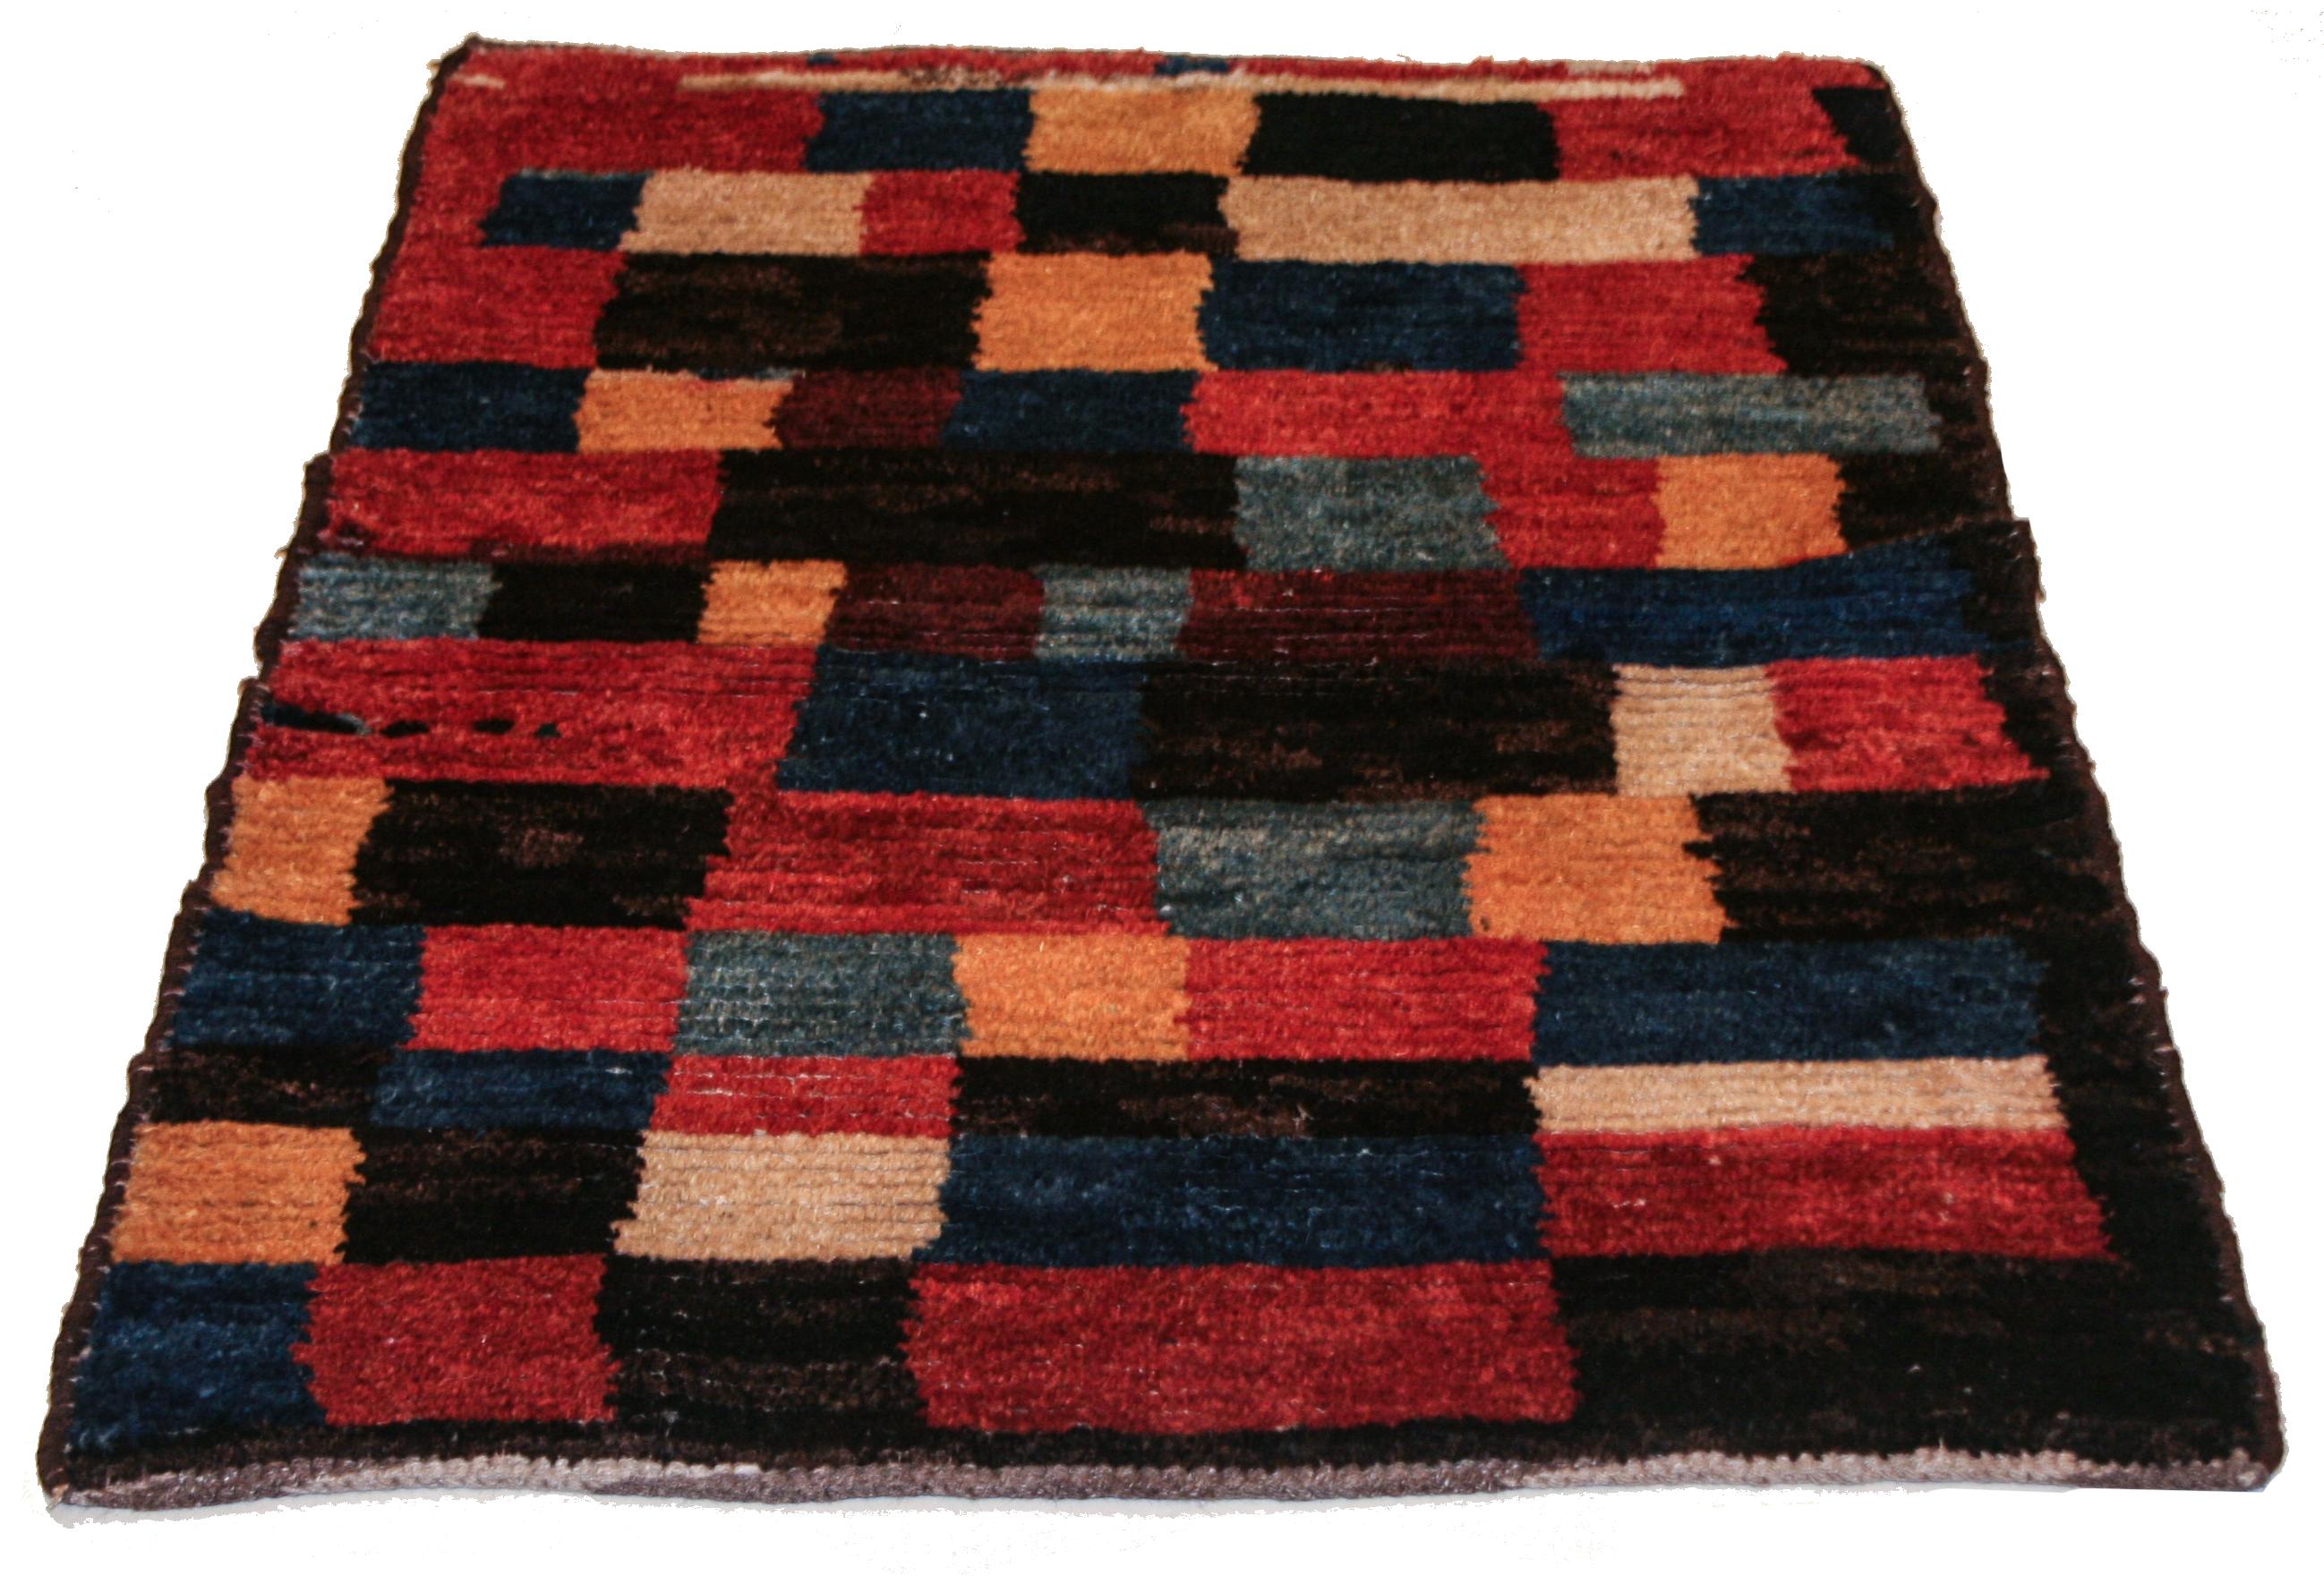 A small tribal rug distinguished by an abstract rendition of the checkerboard pattern. The wonky, naive-like character of the design is typical of the most genuine tribal rugs, which are often executed by younger, more inexperienced weavers. A